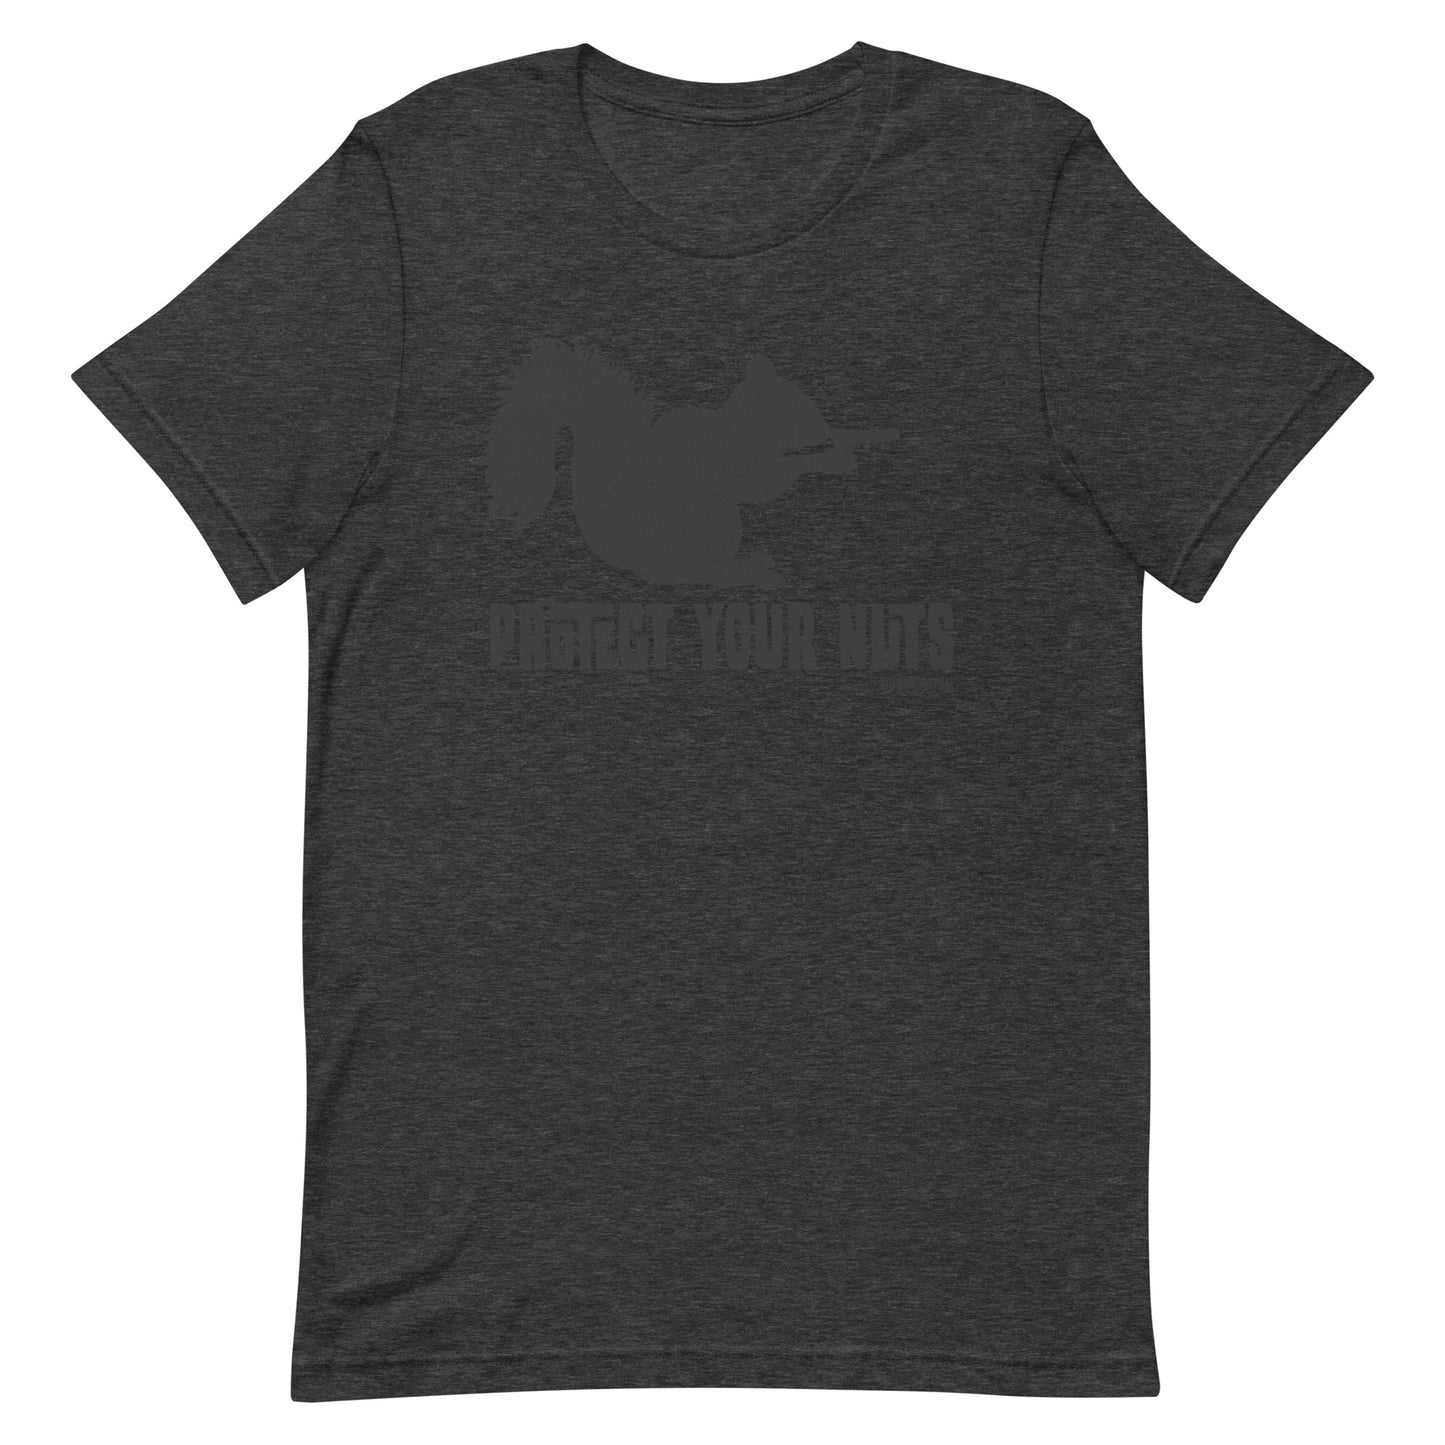 Protect Your Nuts (Pistol) Unisex T-shirt